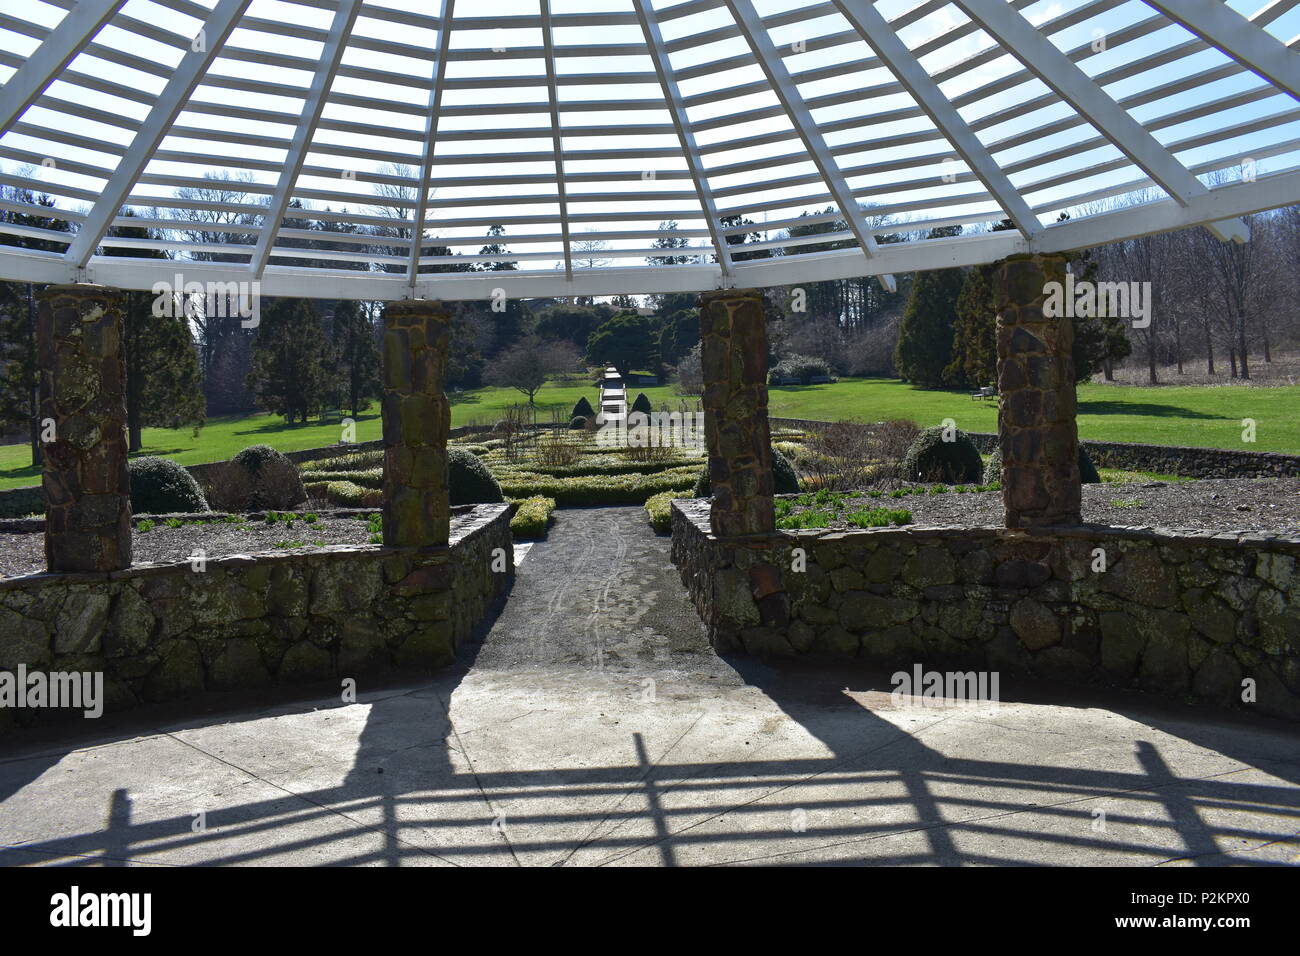 View Of The Garden From Inside The Gazebo At Deep Cut Gardens At